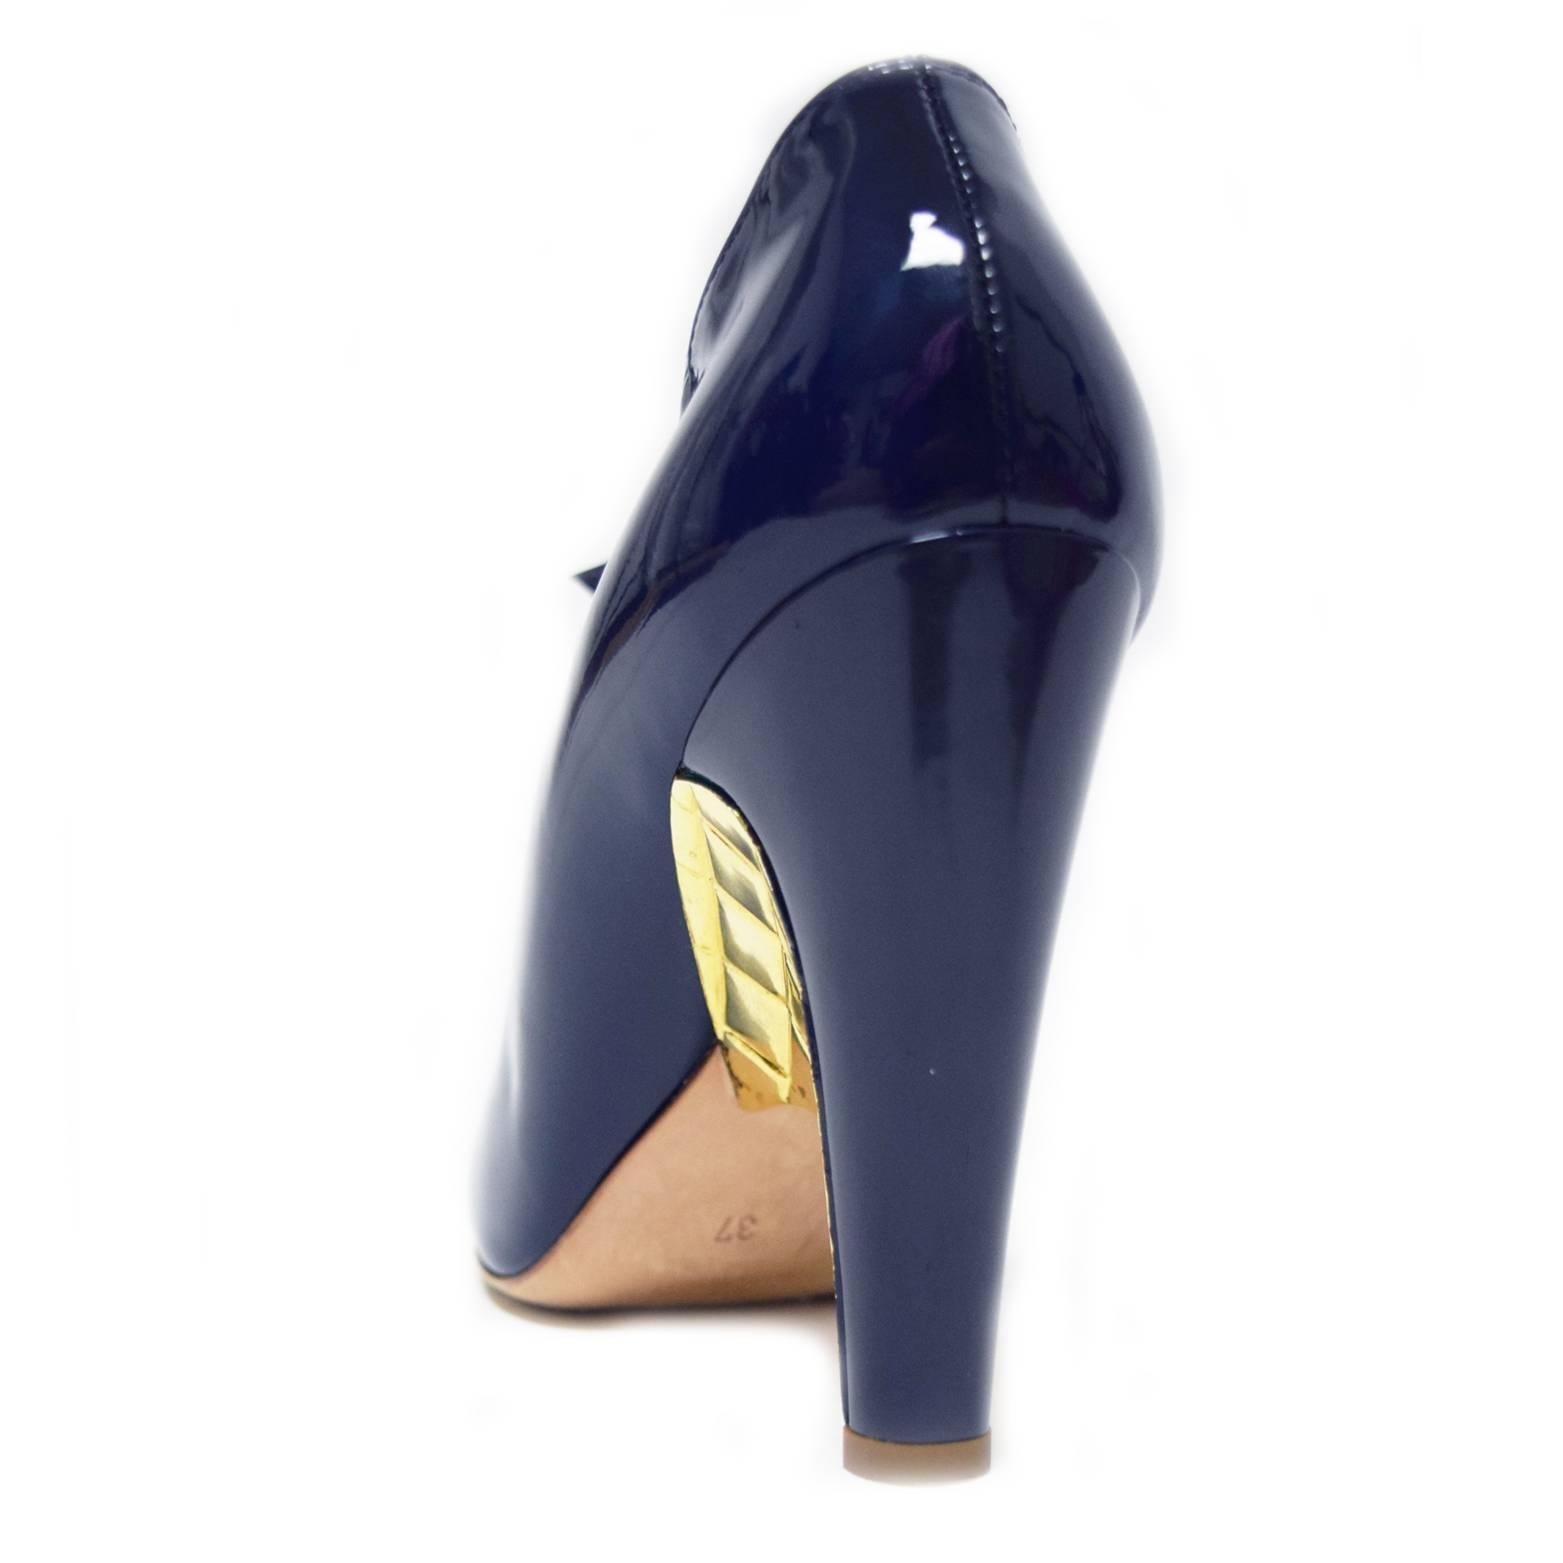 Black Chanel Navy Patent Leather Pump with Buckled Upper and Gold Wedge Detail For Sale